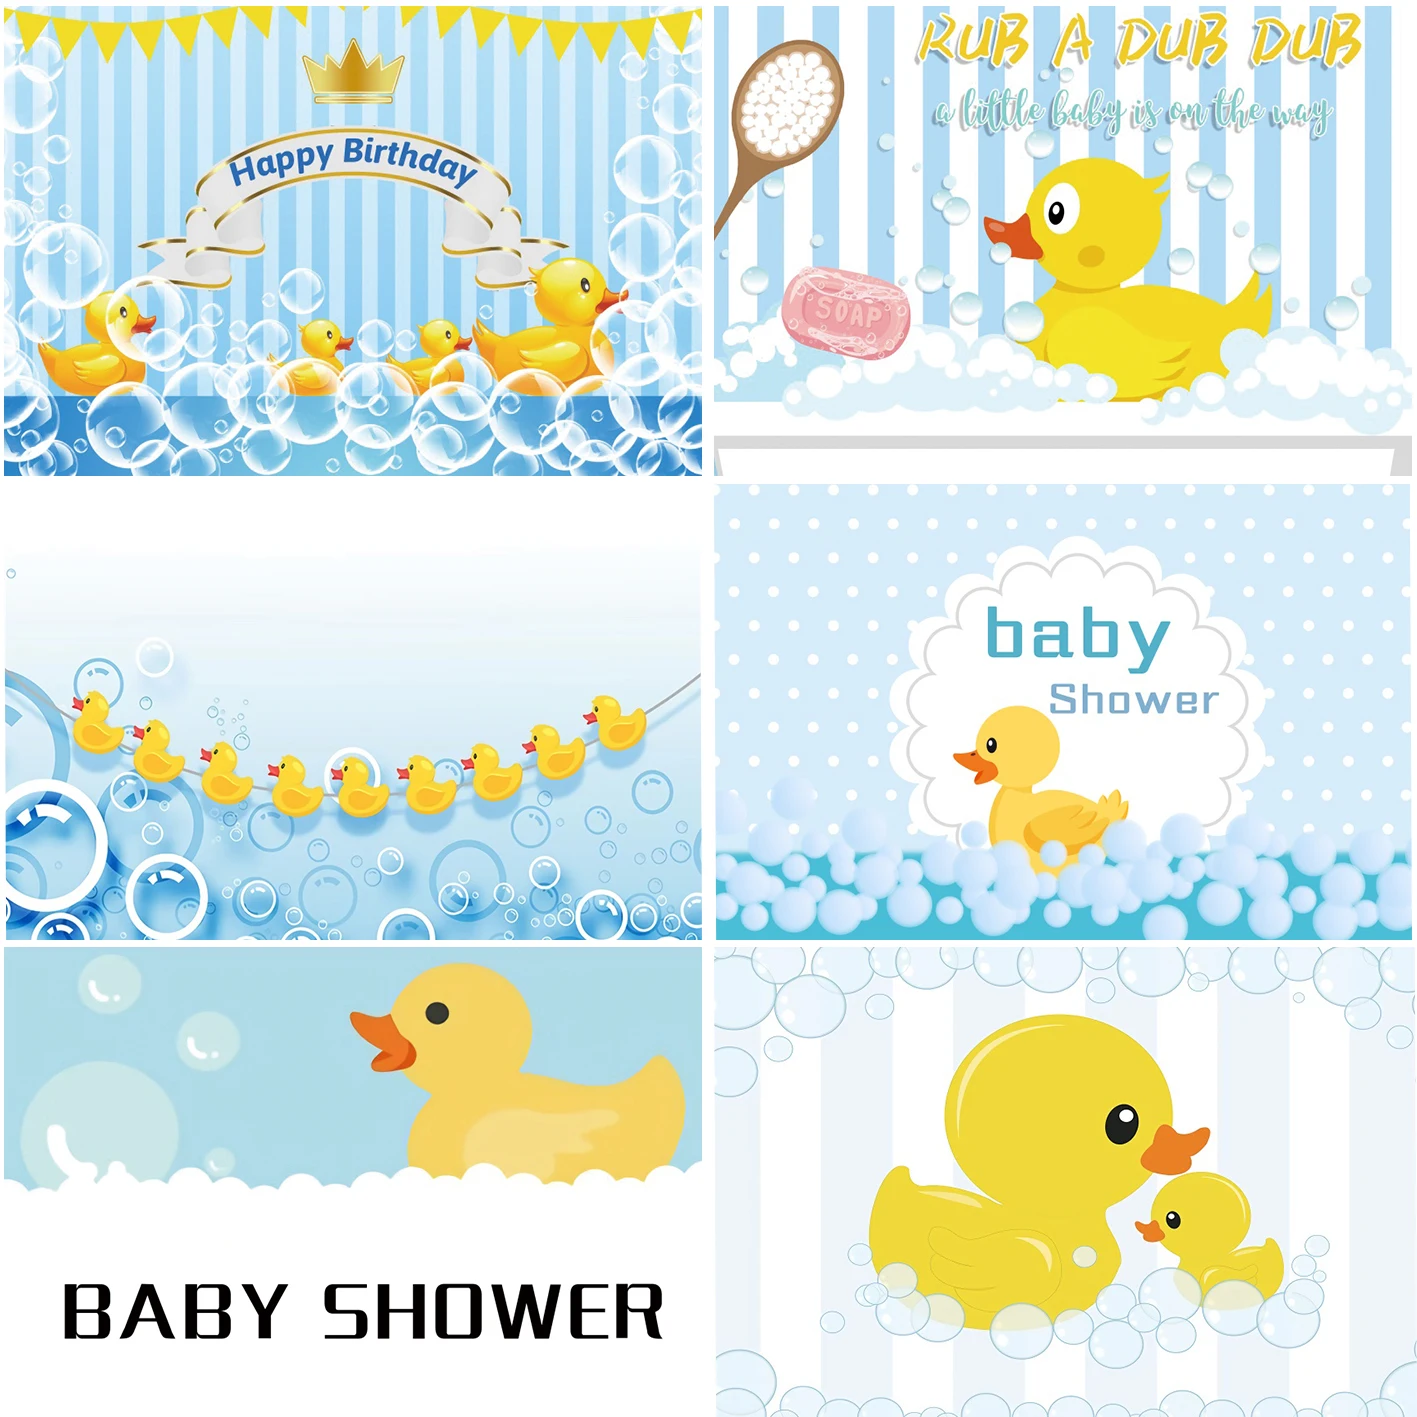 Backgrounds Little Yellow Duck Child 1st Birthday Theme Backdrops Baby Shower Newborn Party Decor Photographic Banner Props